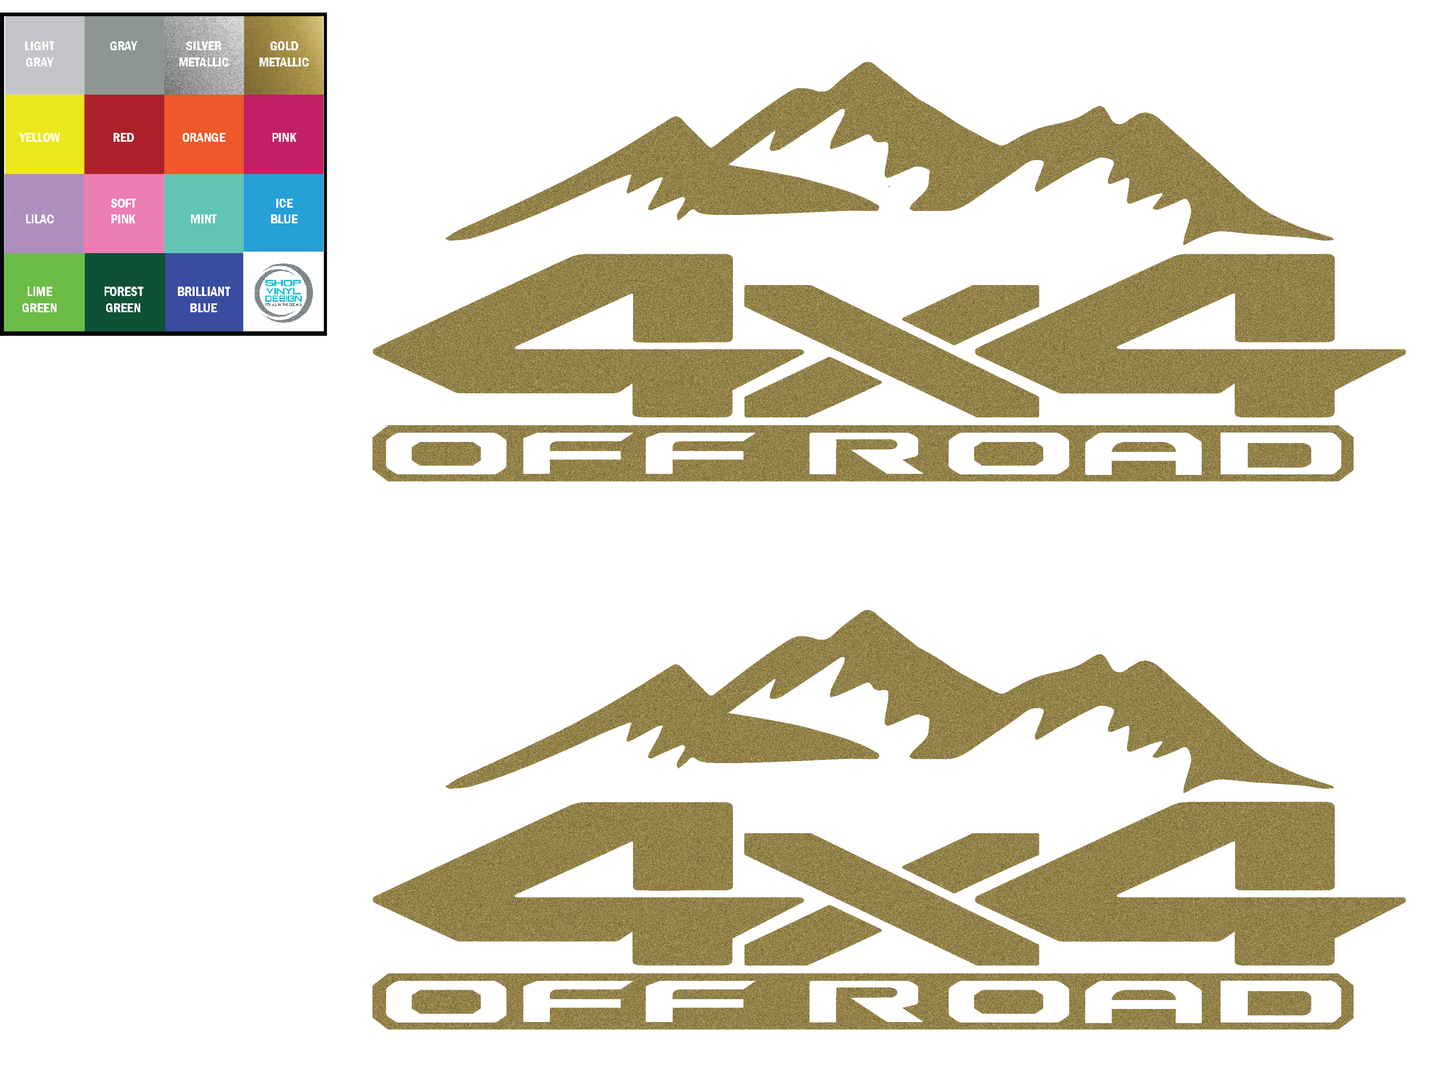 RAM Trucks 4 x 4 Off Road Replacement Bedside Decals #18Mountain